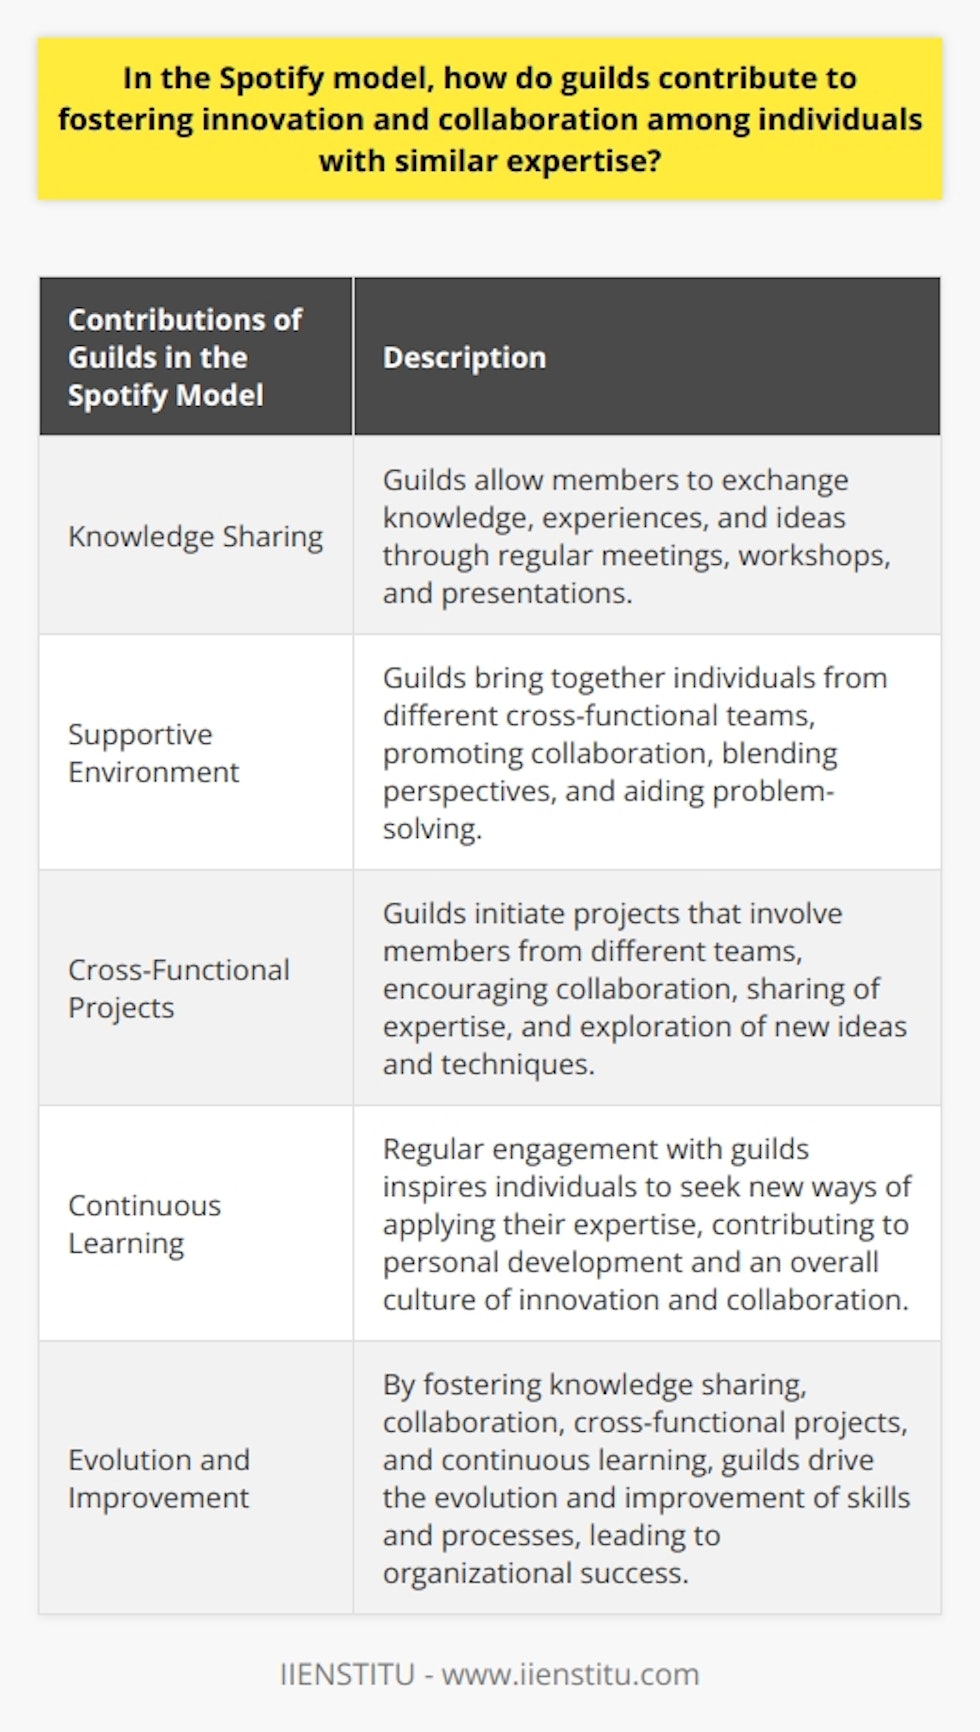 In the Spotify model, guilds are essential for fostering innovation and collaboration among individuals with similar expertise. Guilds are informal communities that allow members to exchange knowledge, experiences, and ideas. They promote knowledge sharing through regular meetings, workshops, and presentations, allowing individuals to learn from each other's trials and successes. This not only enhances domain-specific proficiency but also creates an environment that encourages creativity.Guilds also establish a supportive environment that facilitates collaboration among members. By bringing together individuals from different cross-functional teams, guilds enable the blending of perspectives and aid in problem-solving. This diversity of expertise encourages members to think differently, leading to innovative solutions to challenges.Furthermore, guilds contribute to innovation and collaboration by initiating cross-functional projects. These projects involve members from different teams, uniting them to work towards a common goal or solve a specific problem. Through this collaboration, guild members not only share their own expertise but also gain a broader understanding of the domain, promoting the exploration of new ideas and techniques.Moreover, guilds in the Spotify model promote continuous learning and personal development. Regular engagement with guilds and exposure to different ideas inspire individuals to seek new ways of applying their expertise in their ongoing work. This constant growth mindset contributes to an overall culture of innovation and collaboration within the organization.In conclusion, guilds are vital in the Spotify model for fostering innovation and collaboration. They support knowledge sharing, create a supportive environment, promote cross-functional projects, and encourage continuous learning among individuals with similar expertise. By implementing these practices, guilds drive the evolution and improvement of skills and processes, ultimately leading to organizational success.